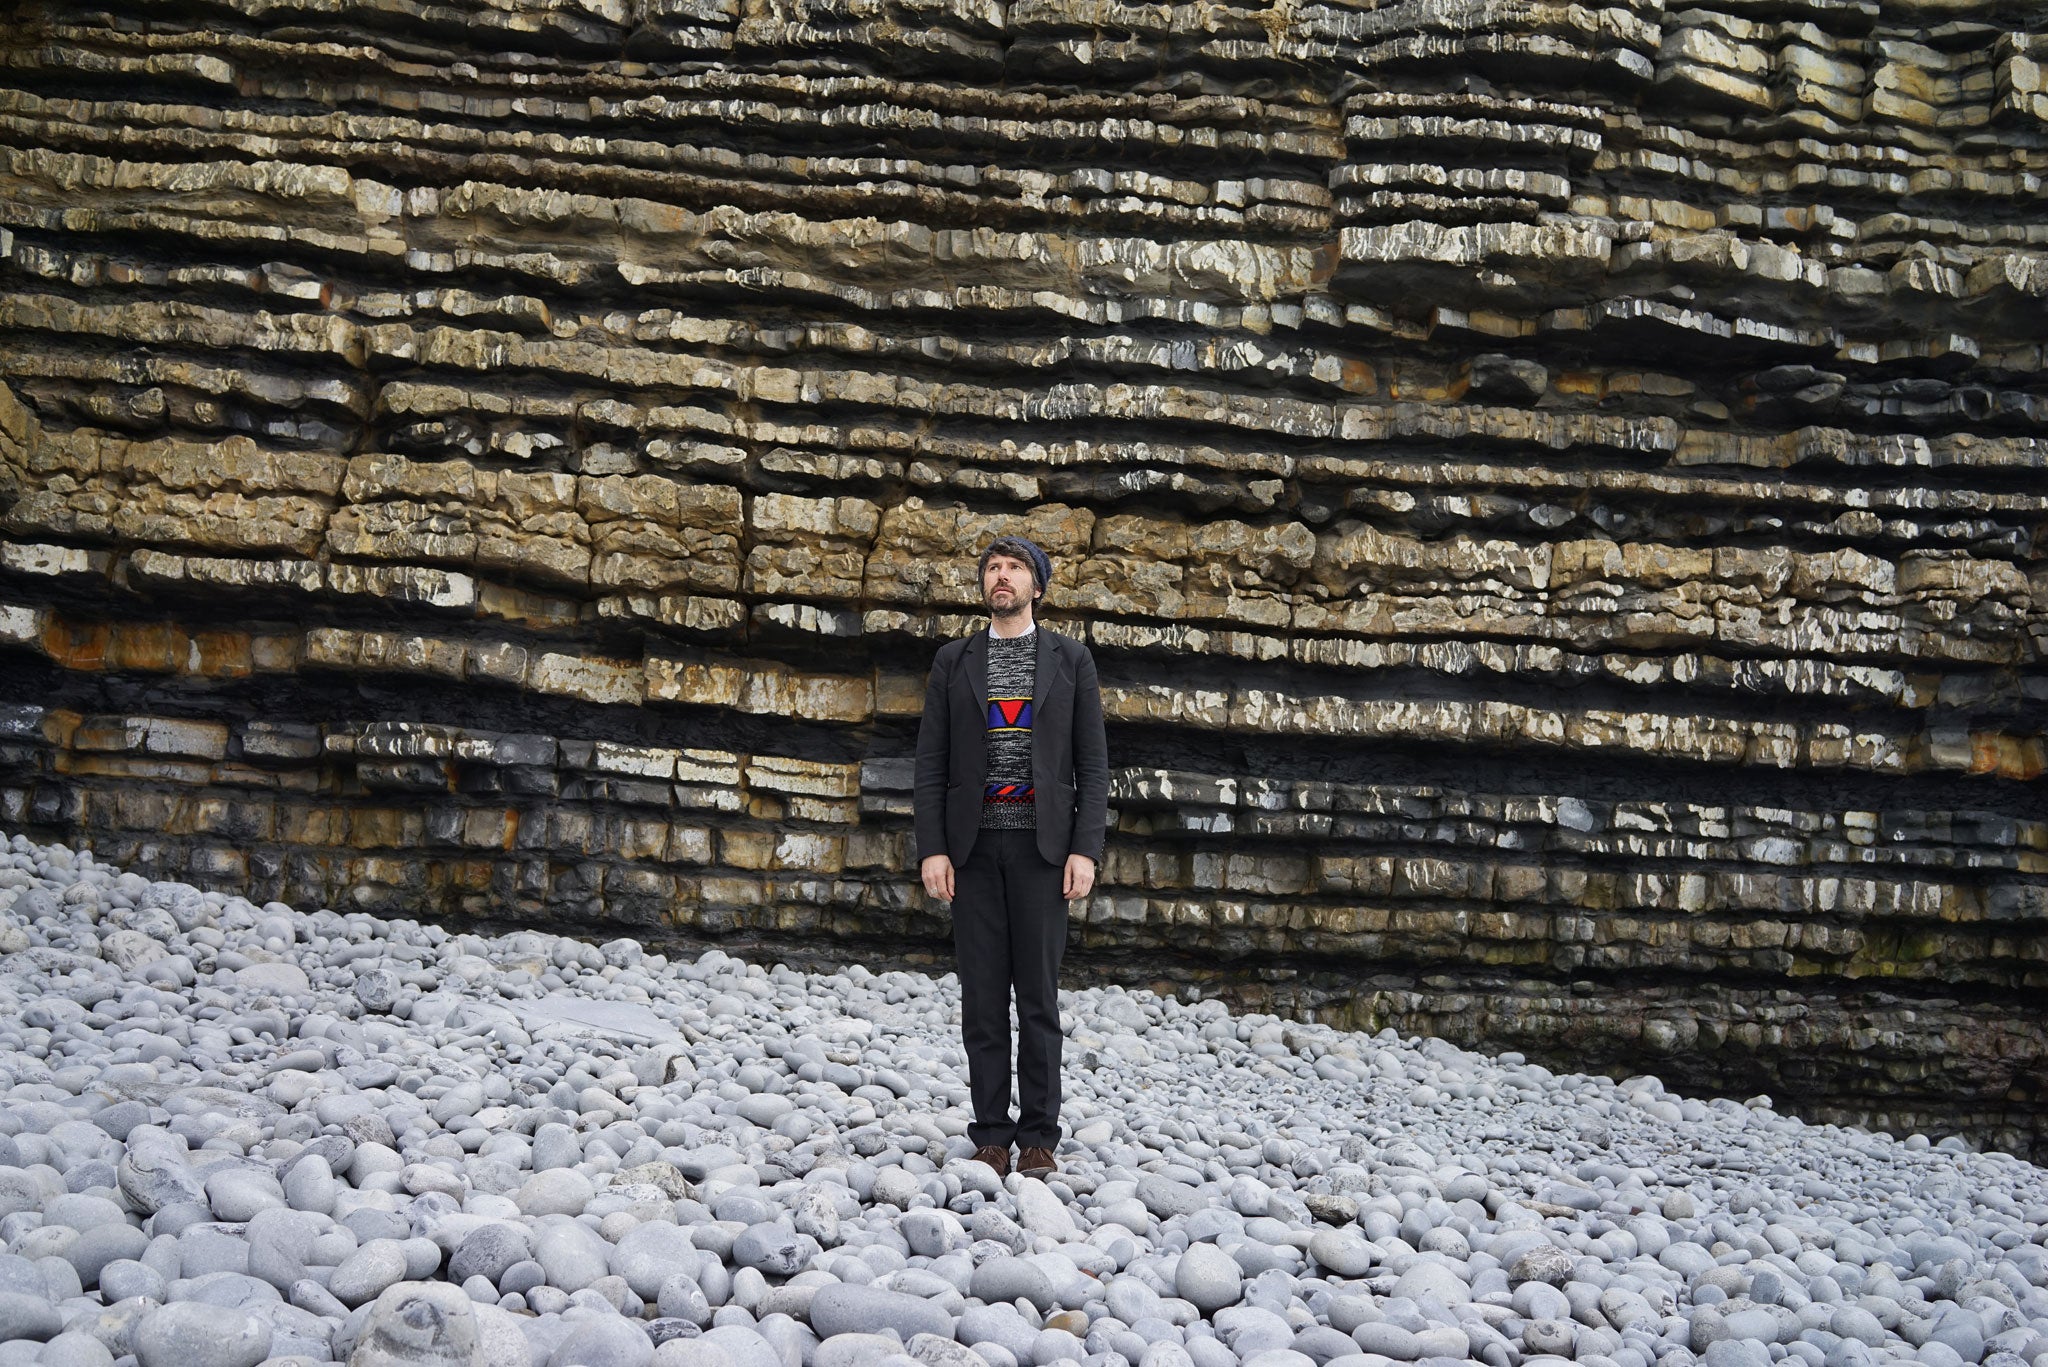 Rhys photographed last month on Southerndown Beach, near Bridgend in South Wales